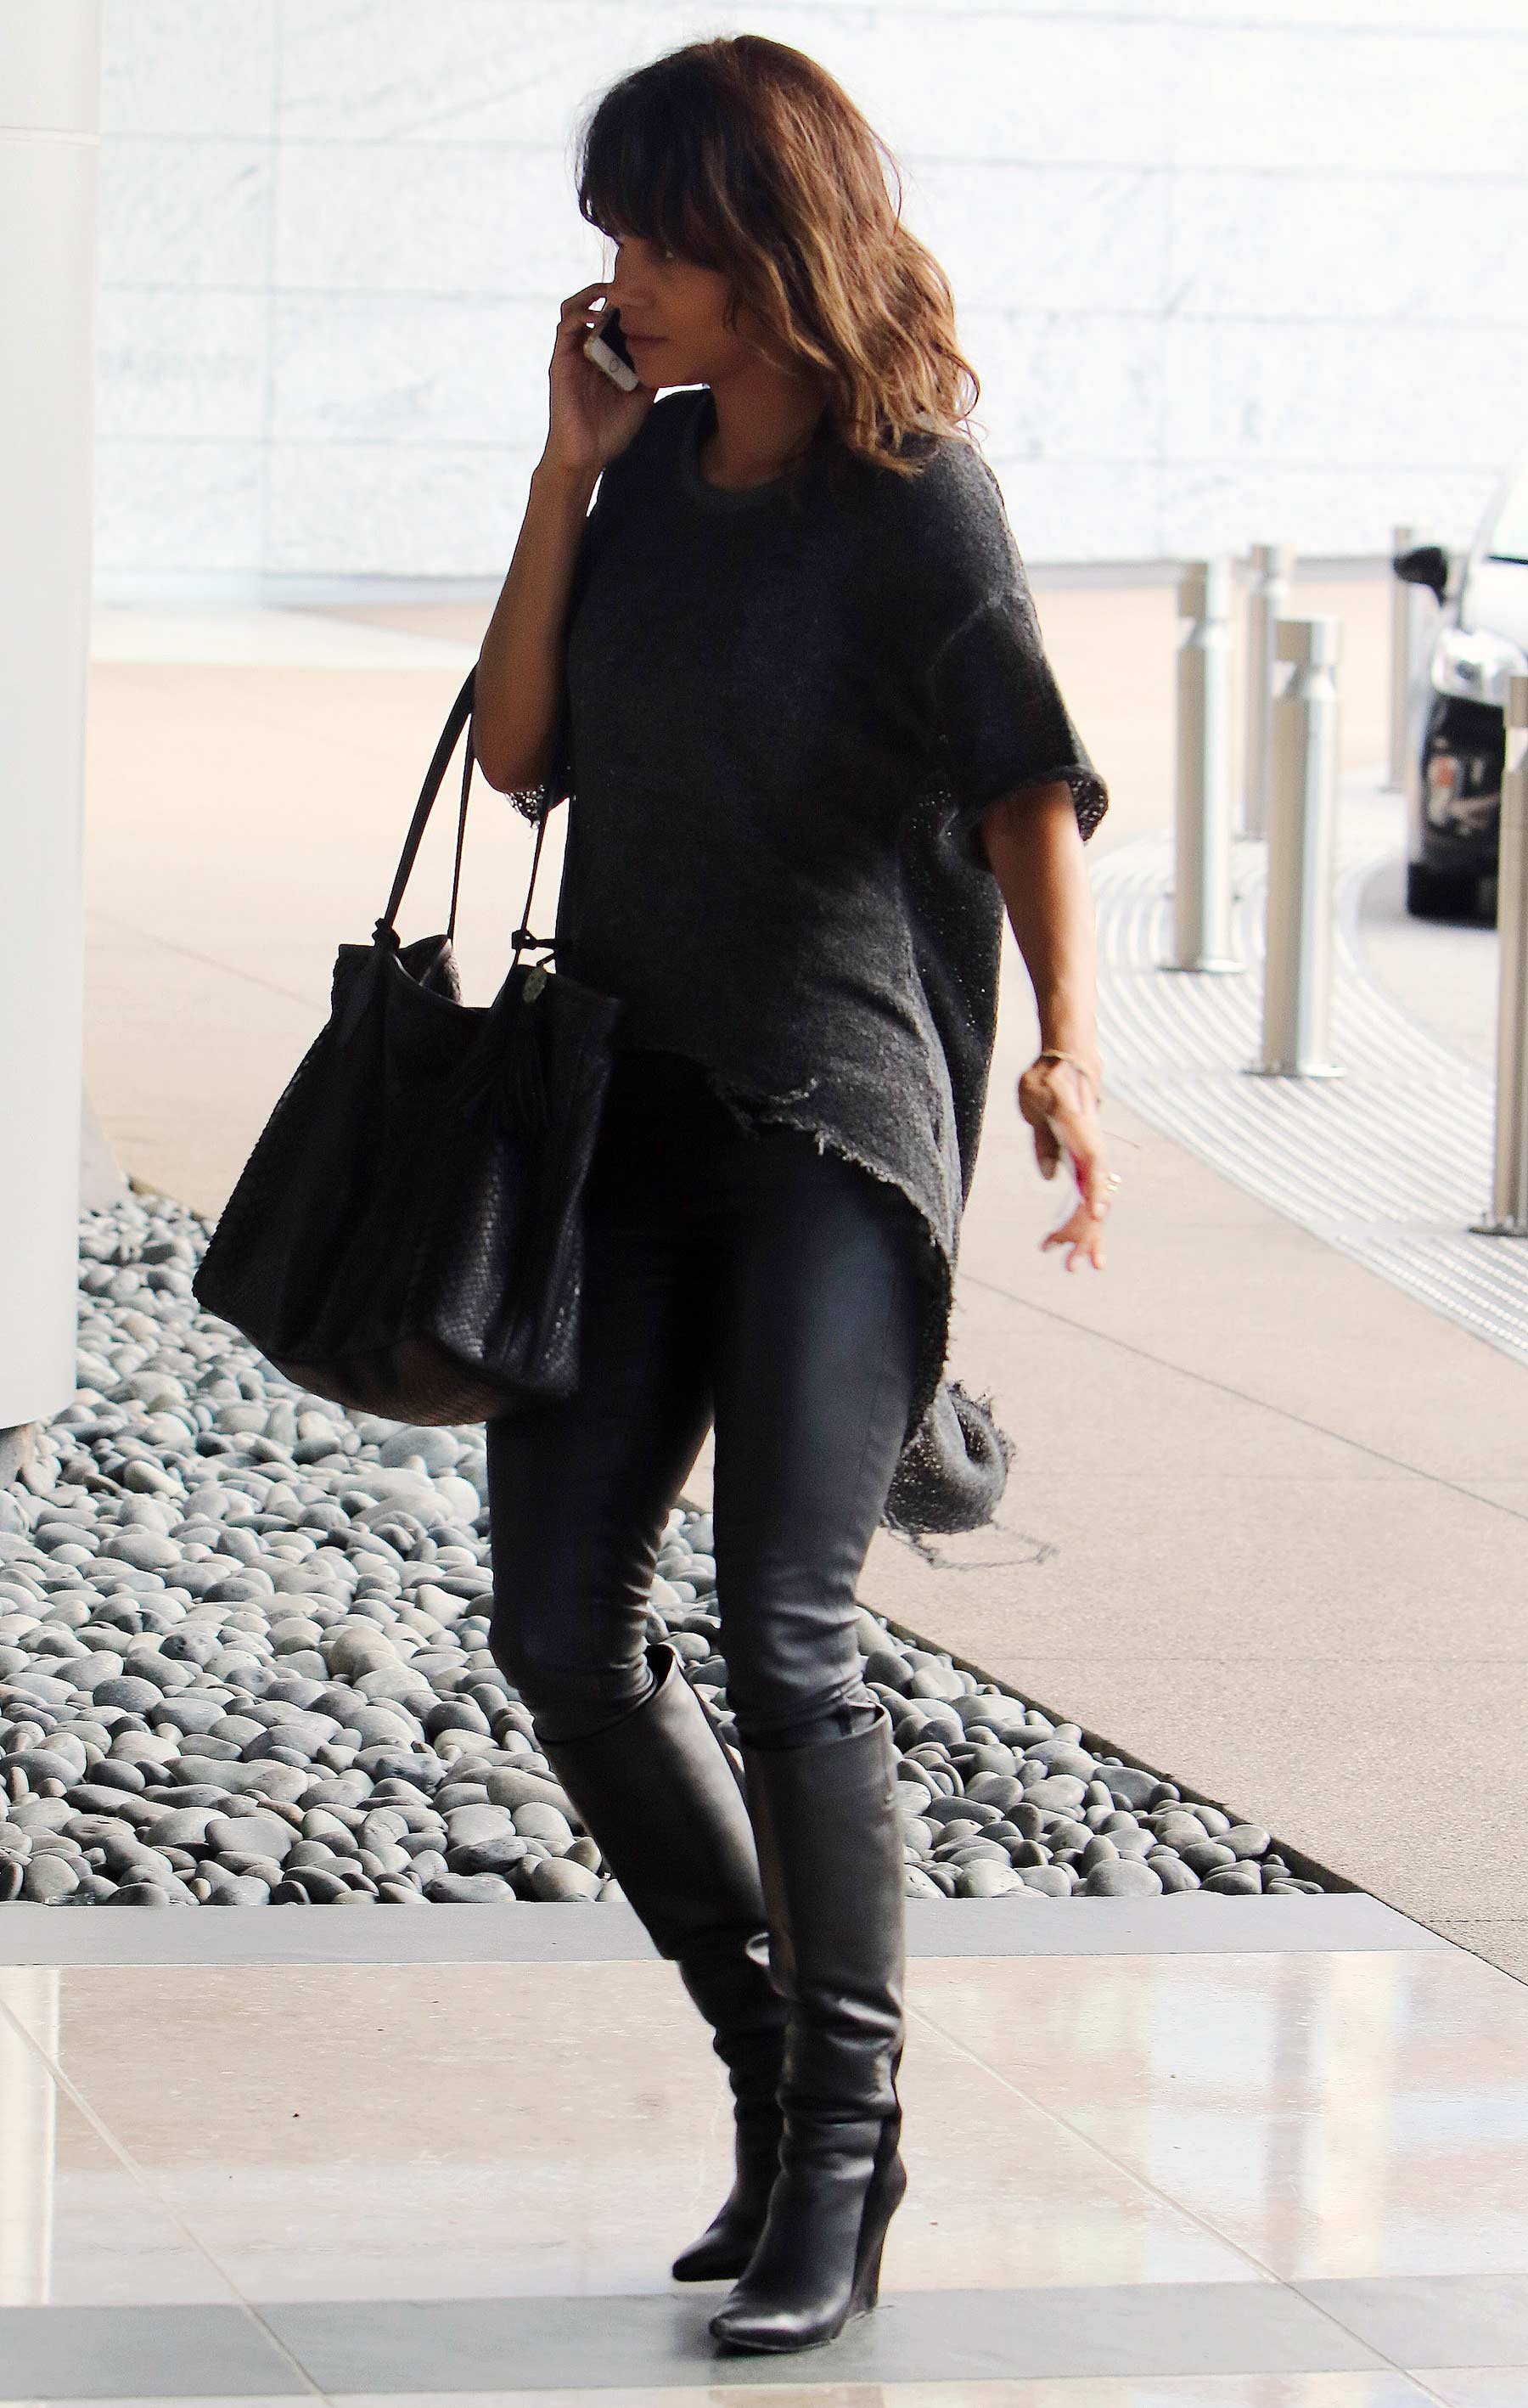 Halle Berry arriving for a meeting in Santa Monica